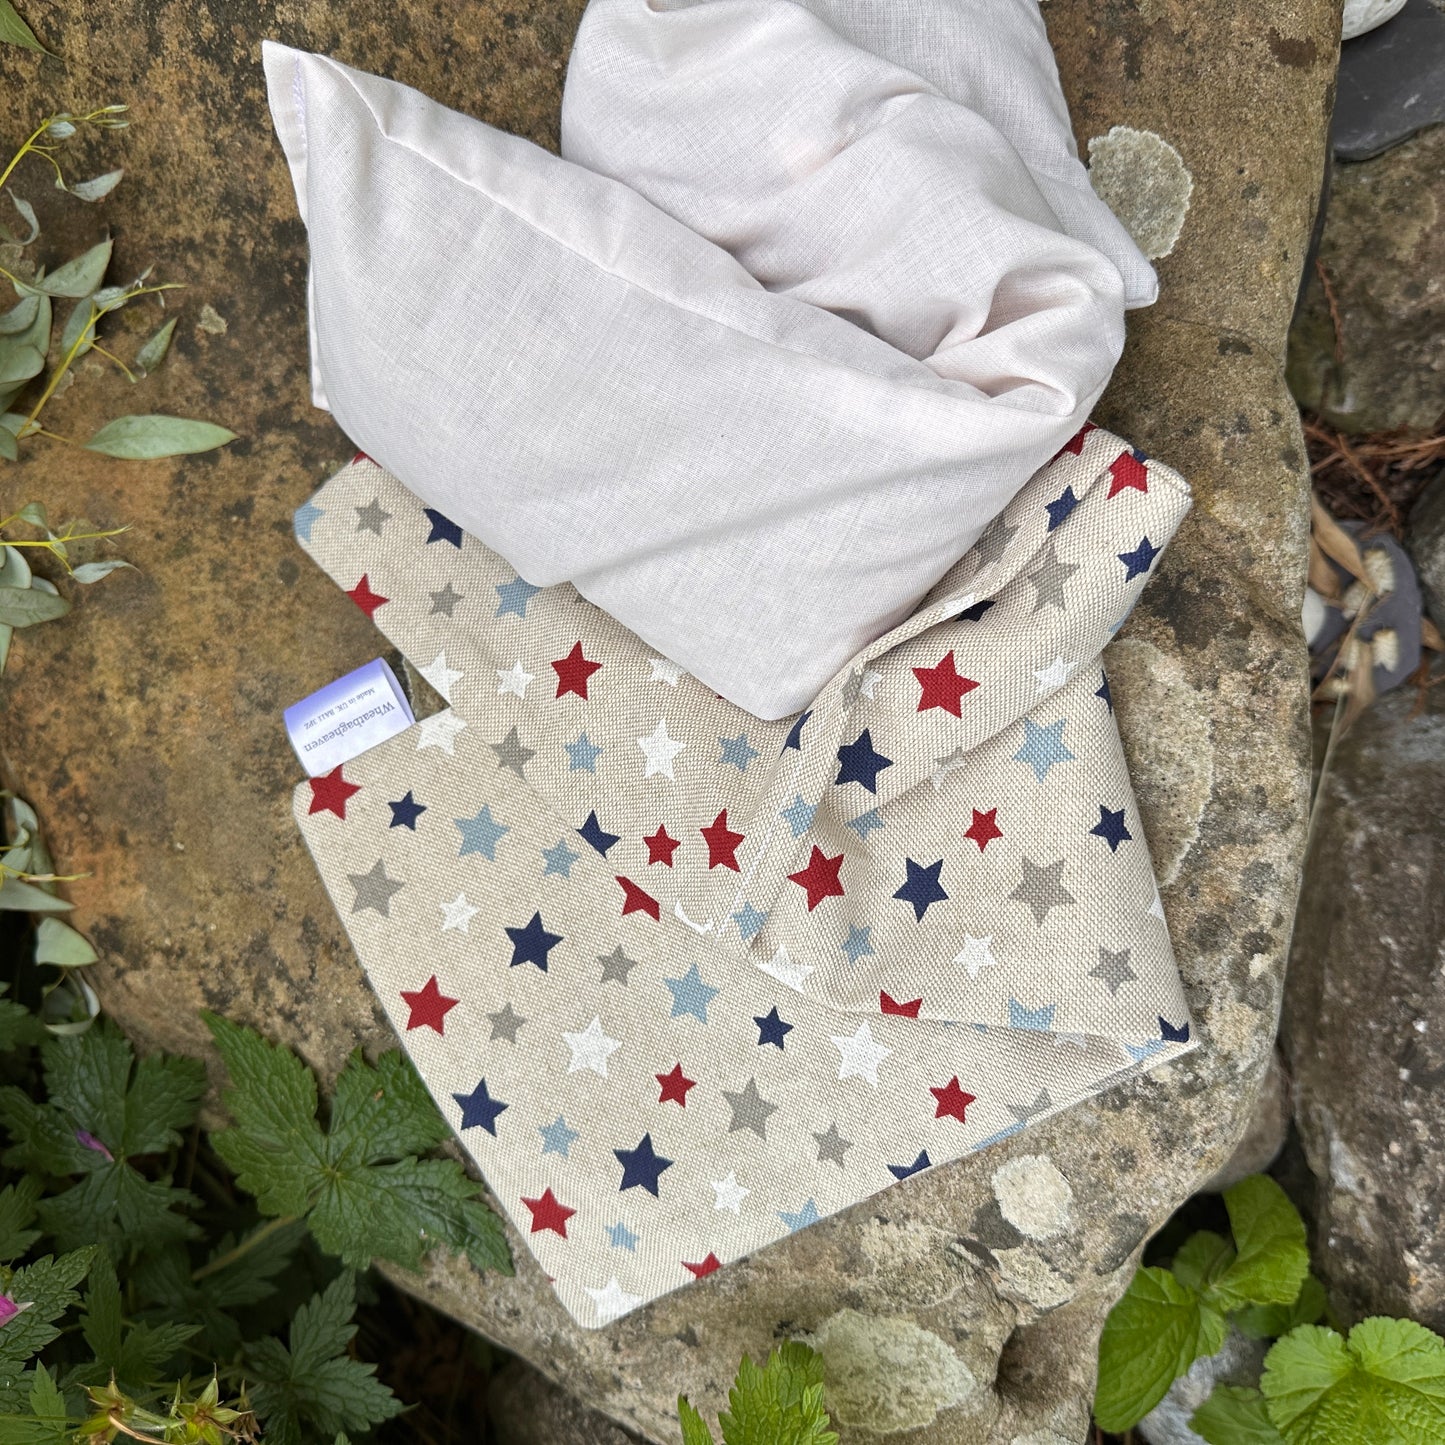 Inside and outside parts of long Wheat bags. Star cotton fabric heat pack with lavender flower.